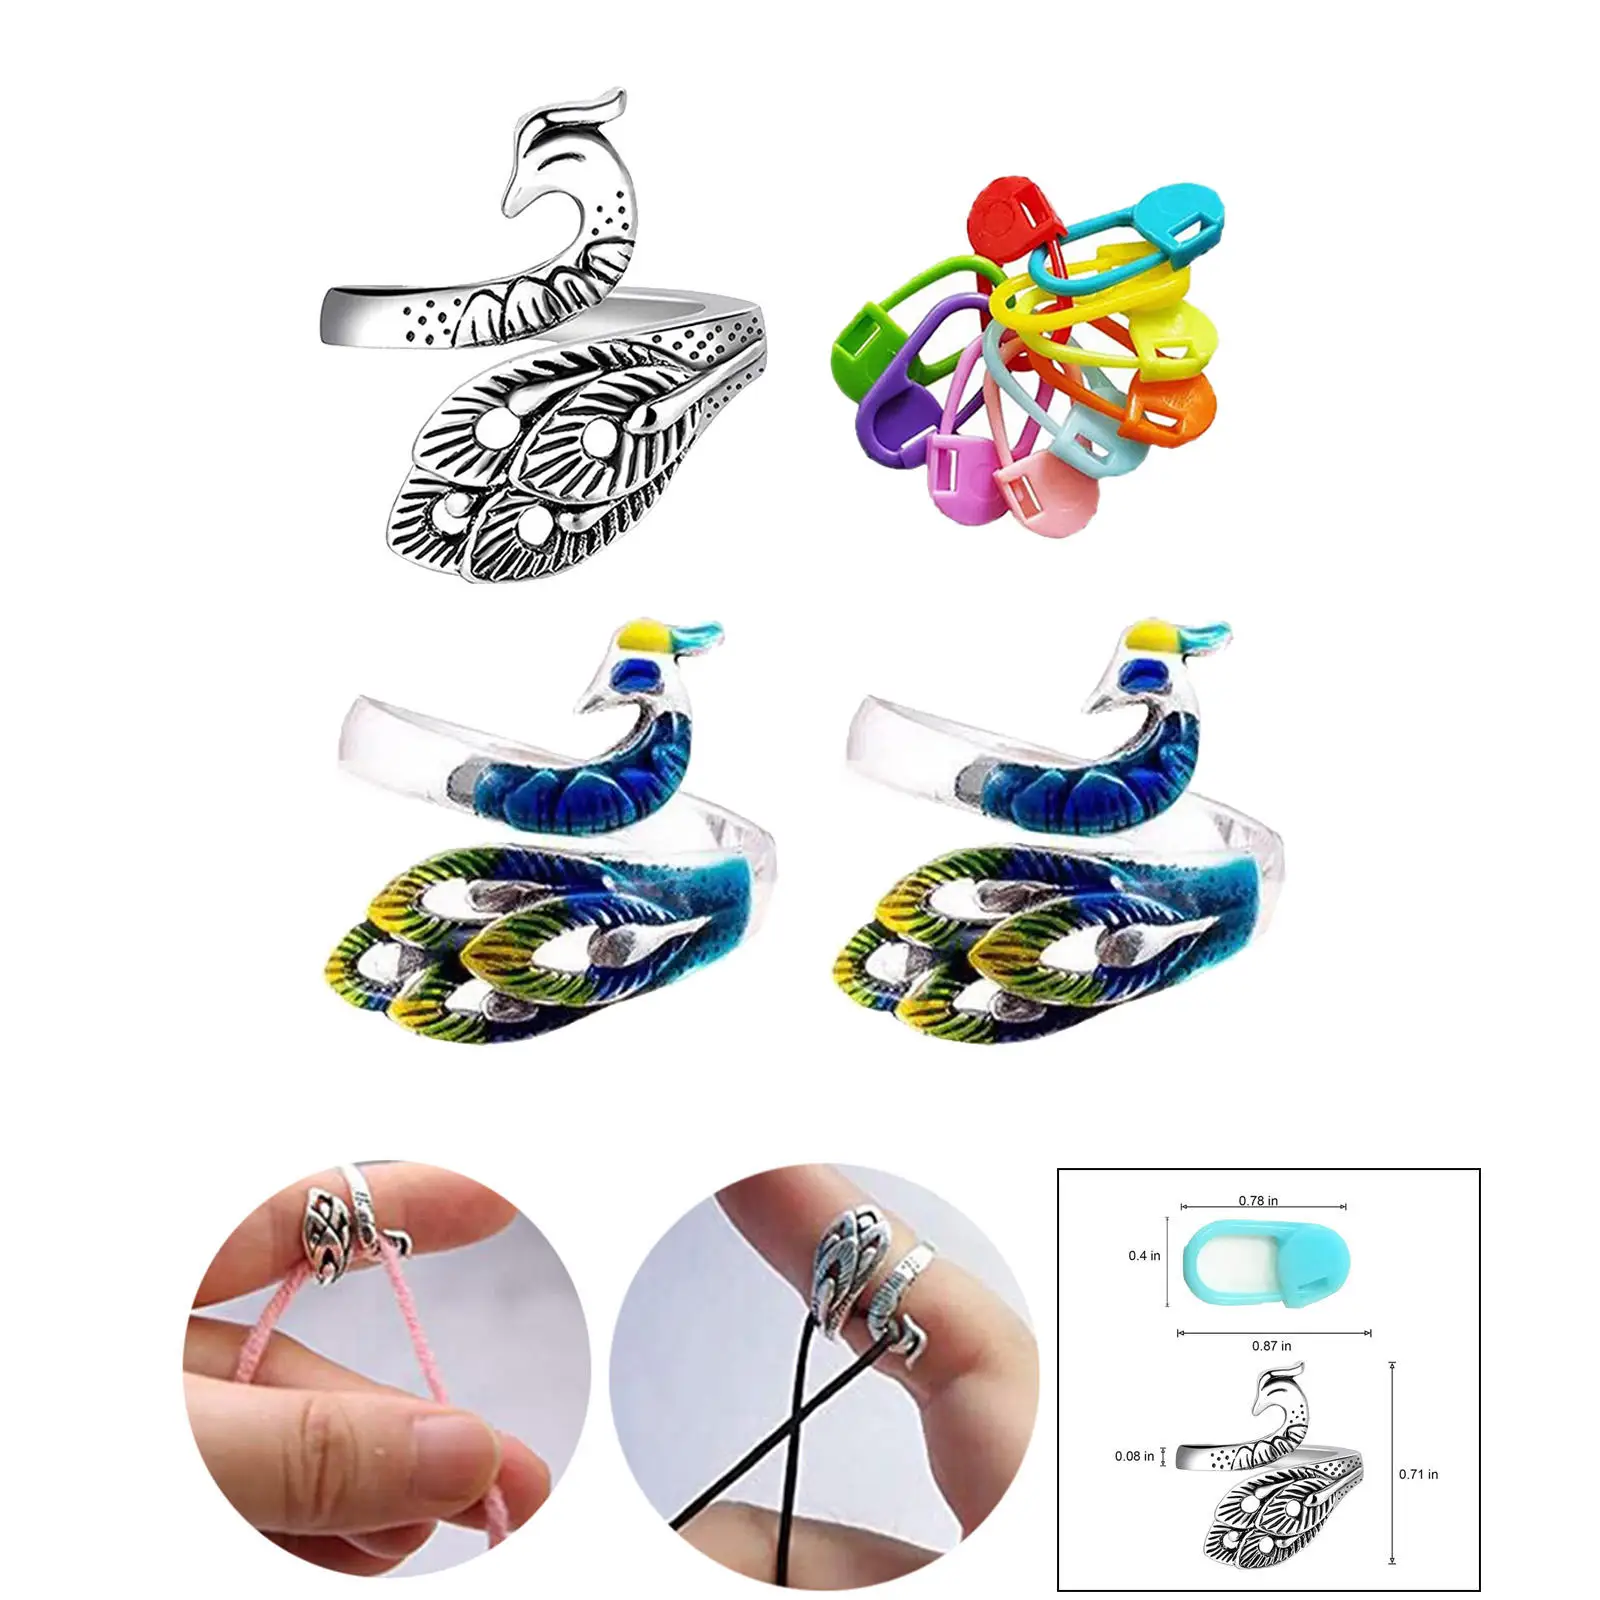 Crochet Ring Kit Silver Peacock Adjustable Knitting Loop 2x Colorful Yarn Guide Ring for Crocheting and Faster Knitting